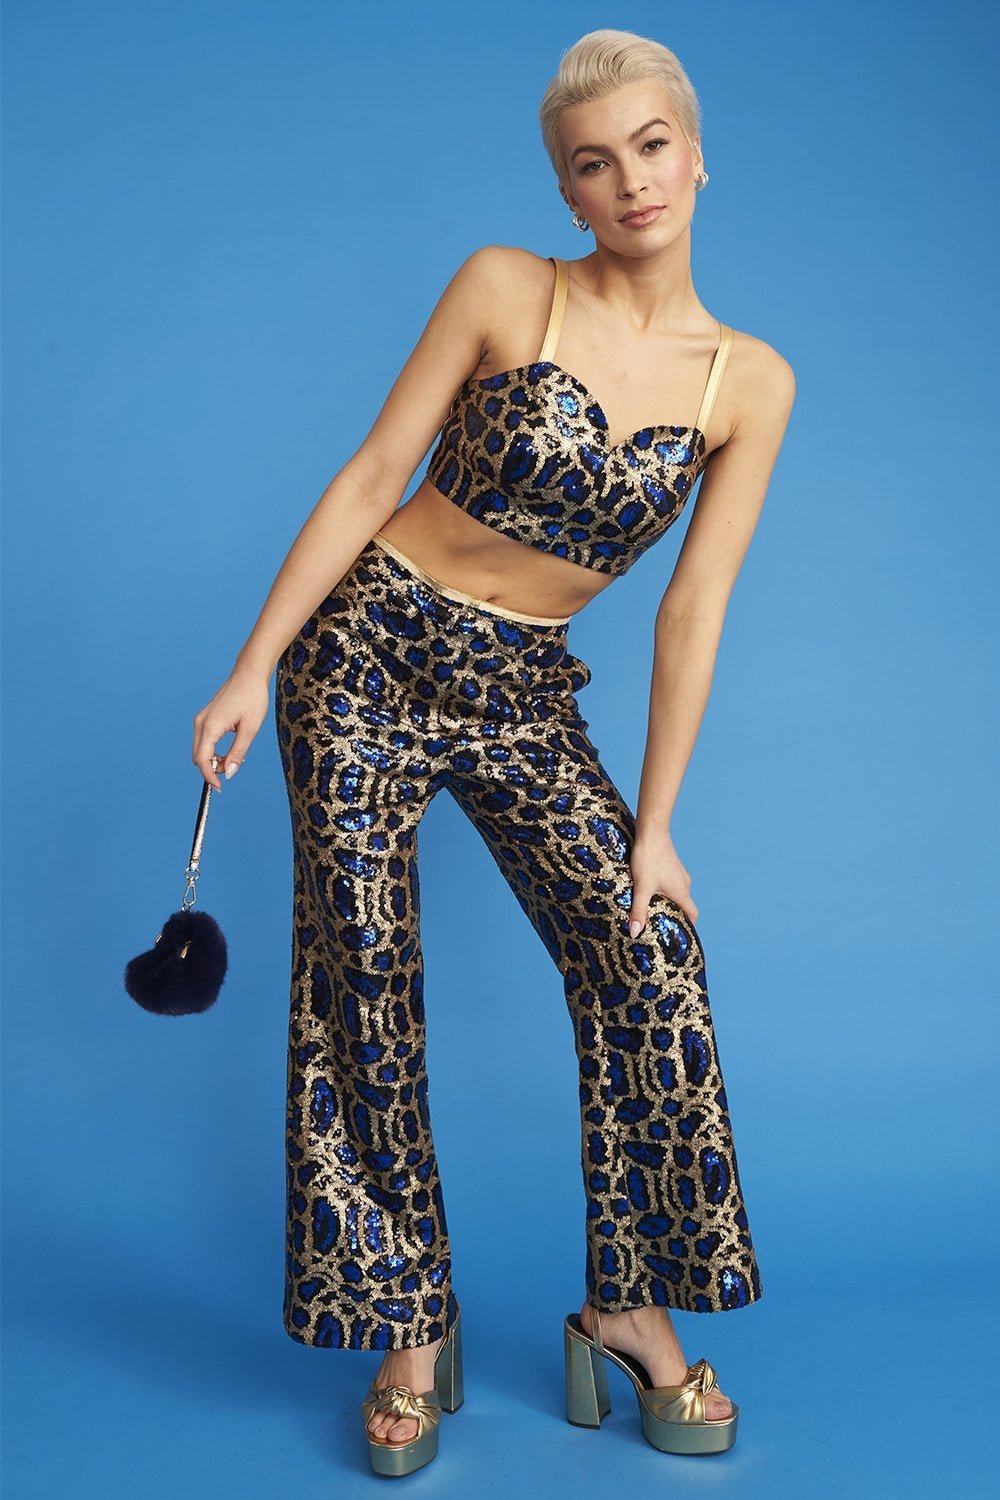 Shop Blue Animal Print Sequin Trousers and women's luxury and designer clothes at www.lux-apparel.co.uk